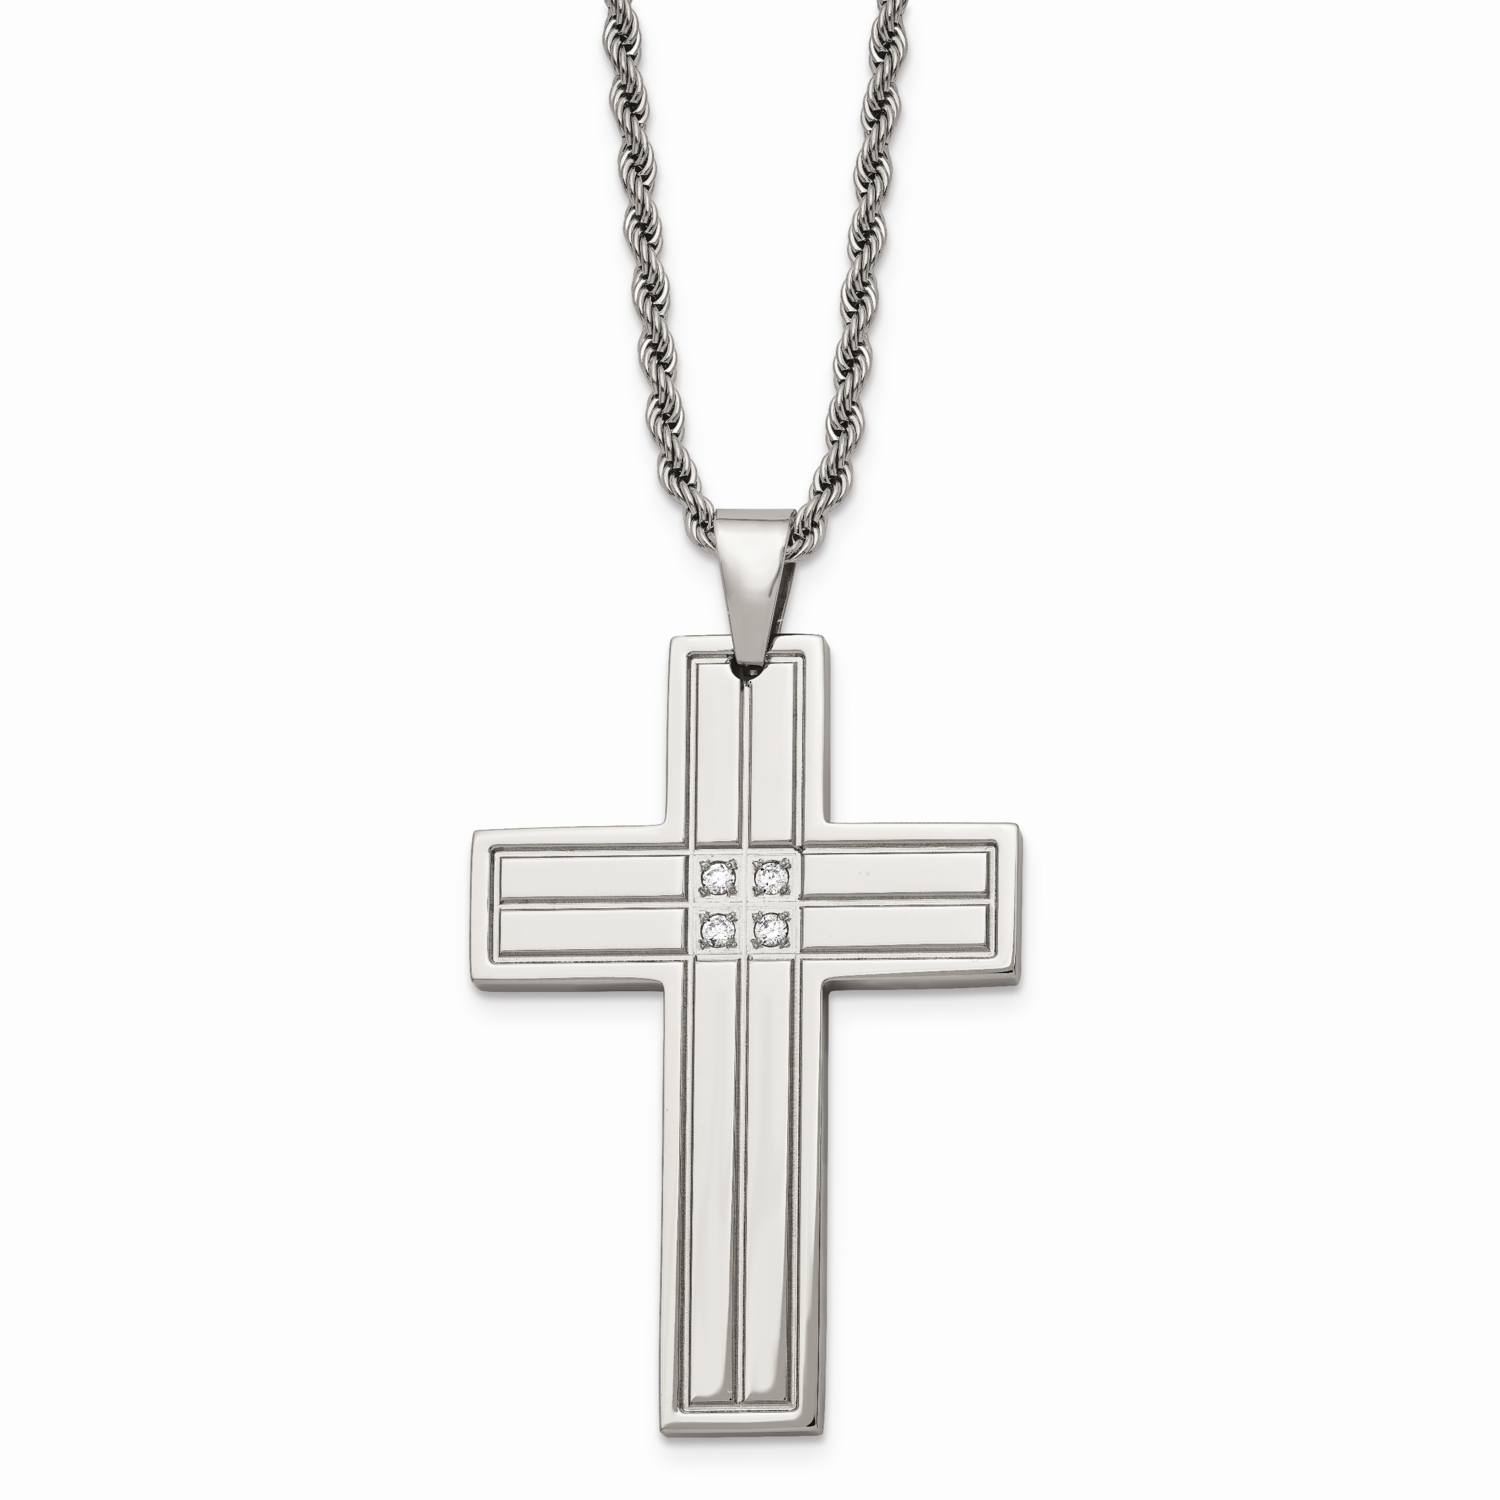 Cross CZ Stone Pendant Necklace Stainless Steel Polished SRN737-24